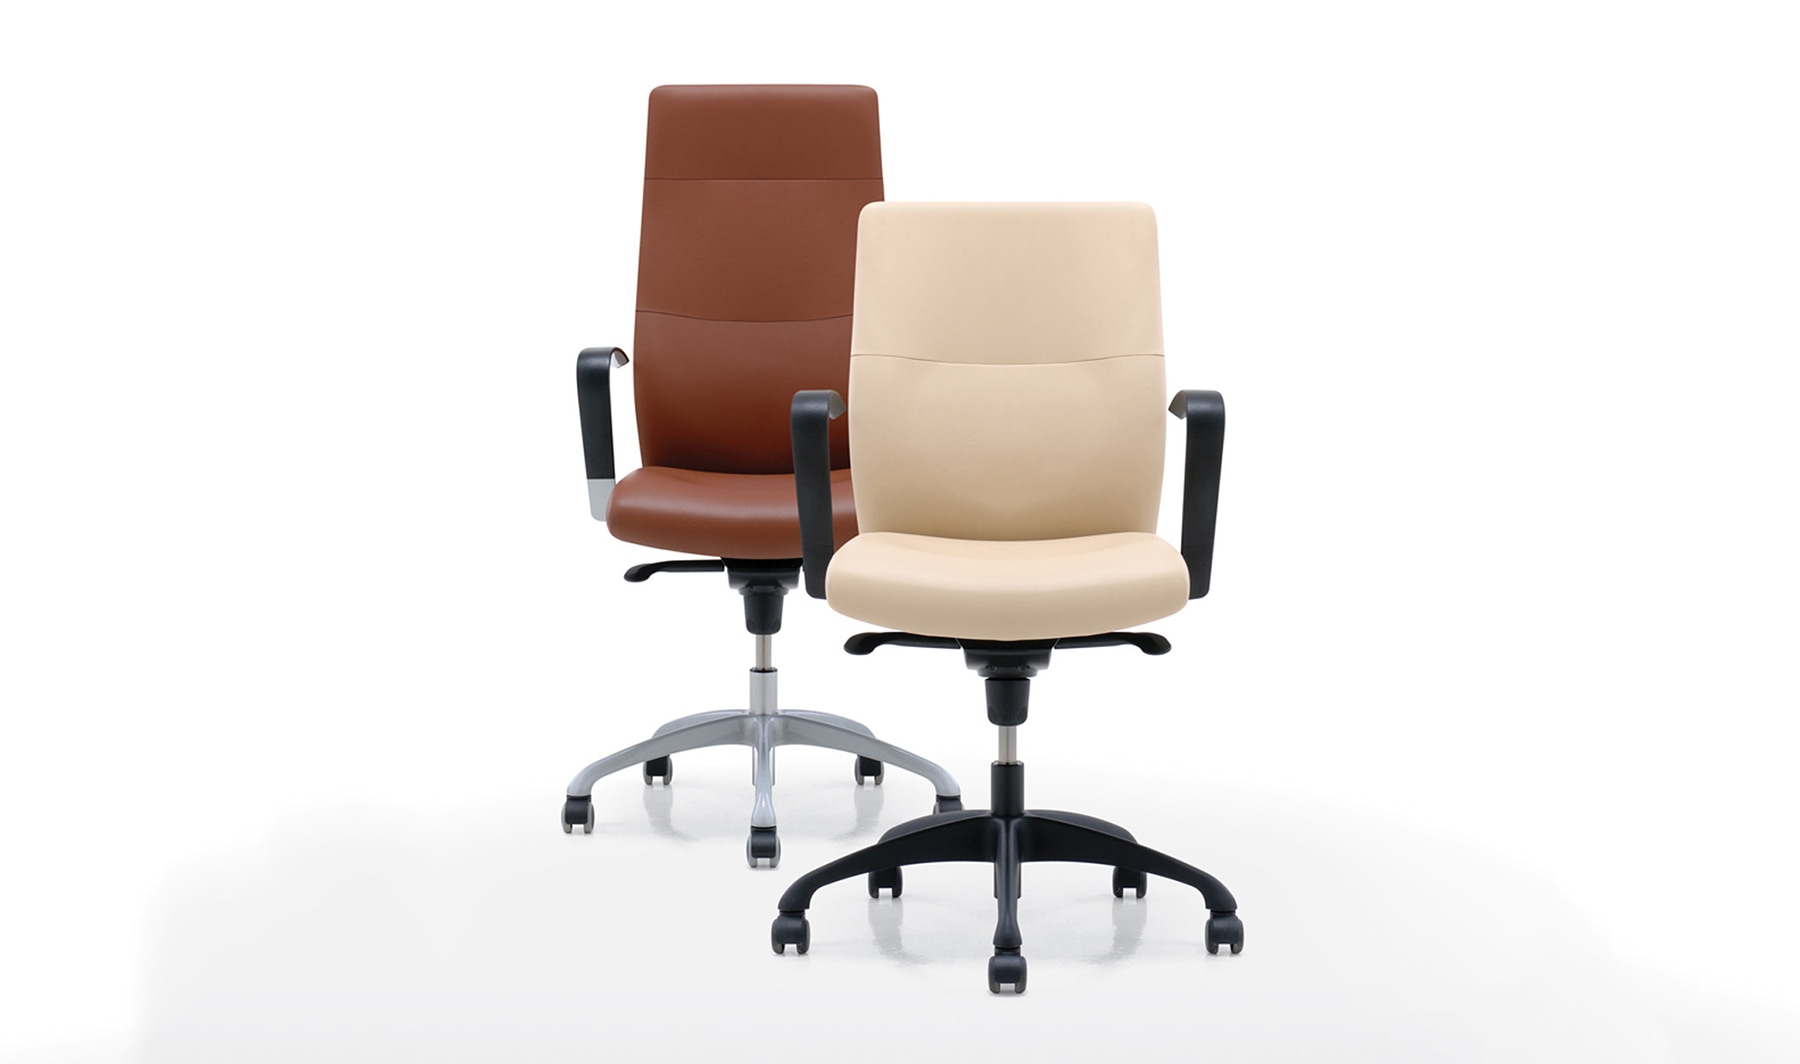 Dorso t-line chairs